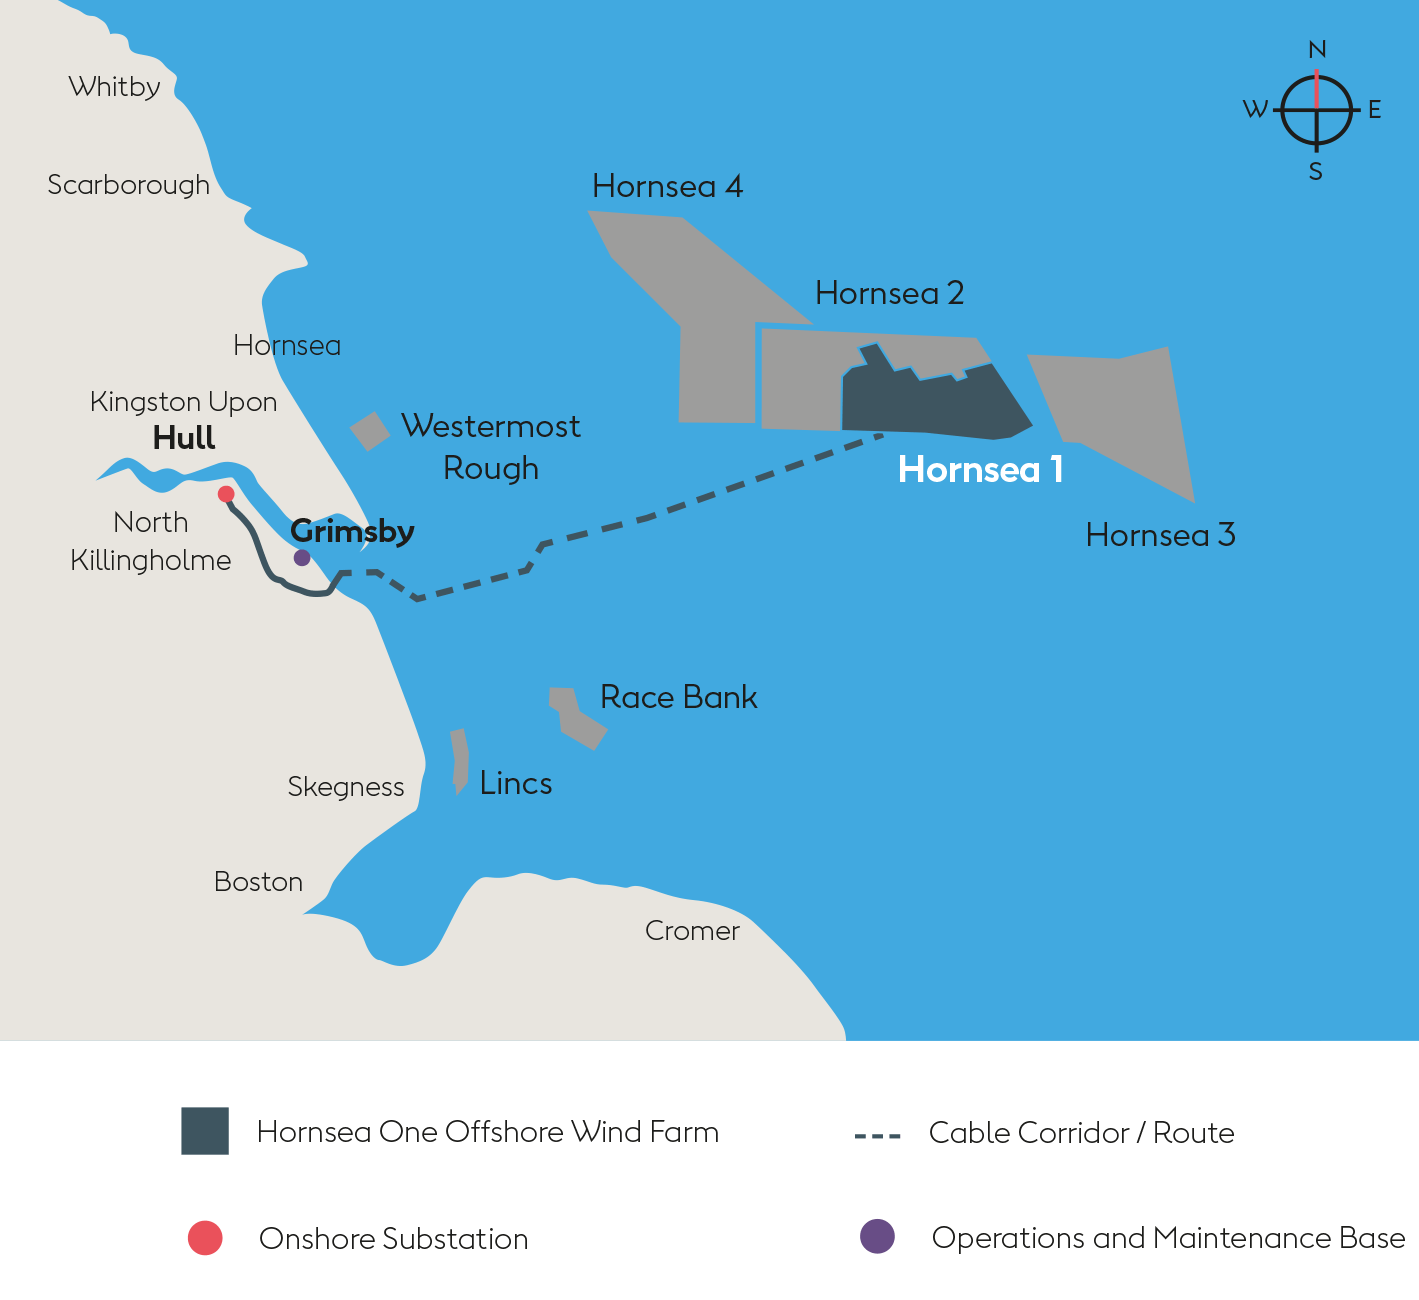 Map showing the location of Hornsea 1 offshore wind farm